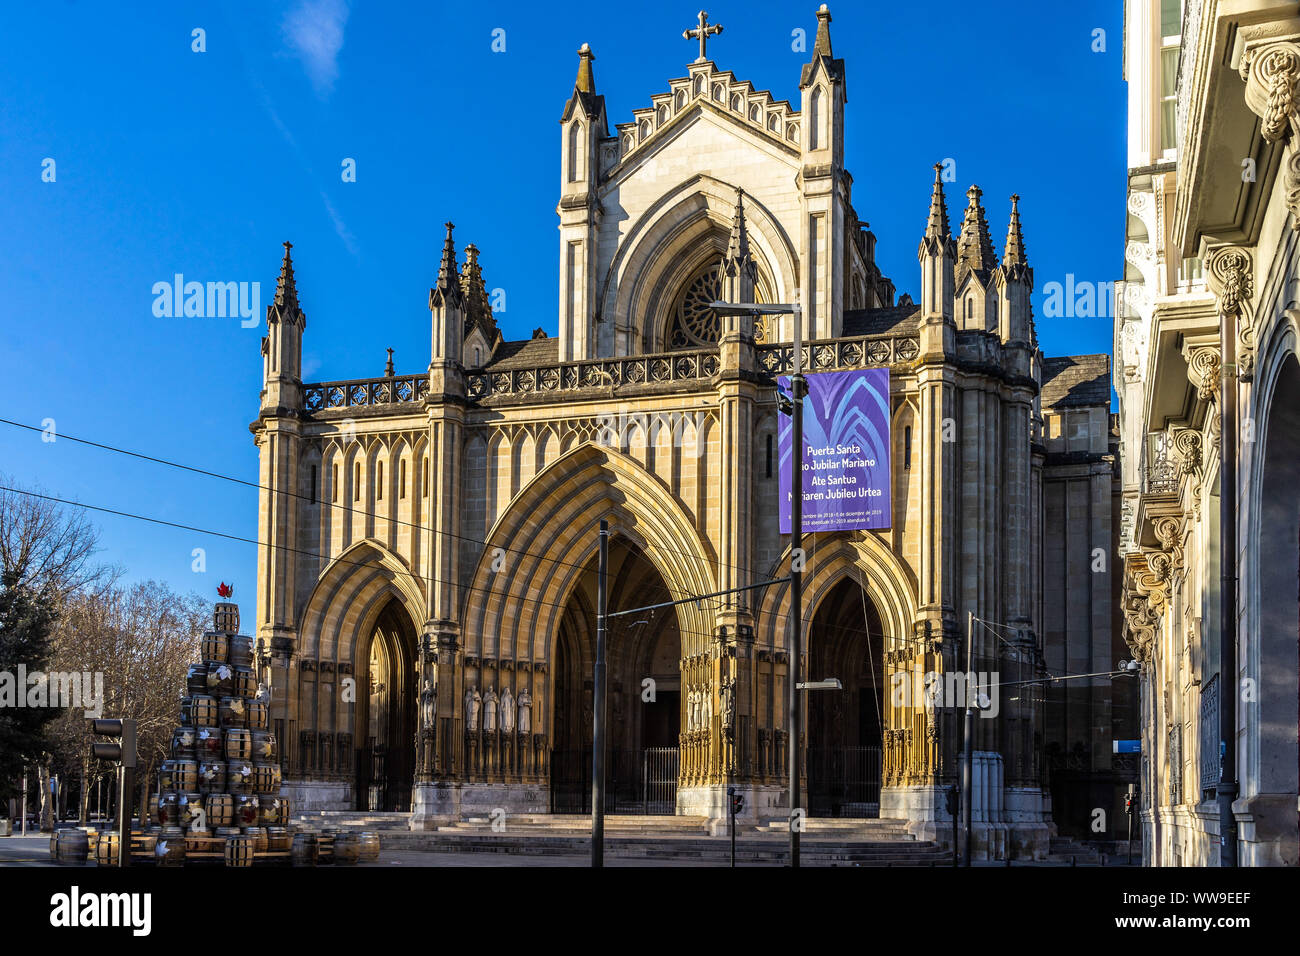 Facade of the new cathedral of Vitoria Gasteiz (Catedral de Maria Inmaculada), built in Neo-Gothich style, Basque Country, Spain Stock Photo